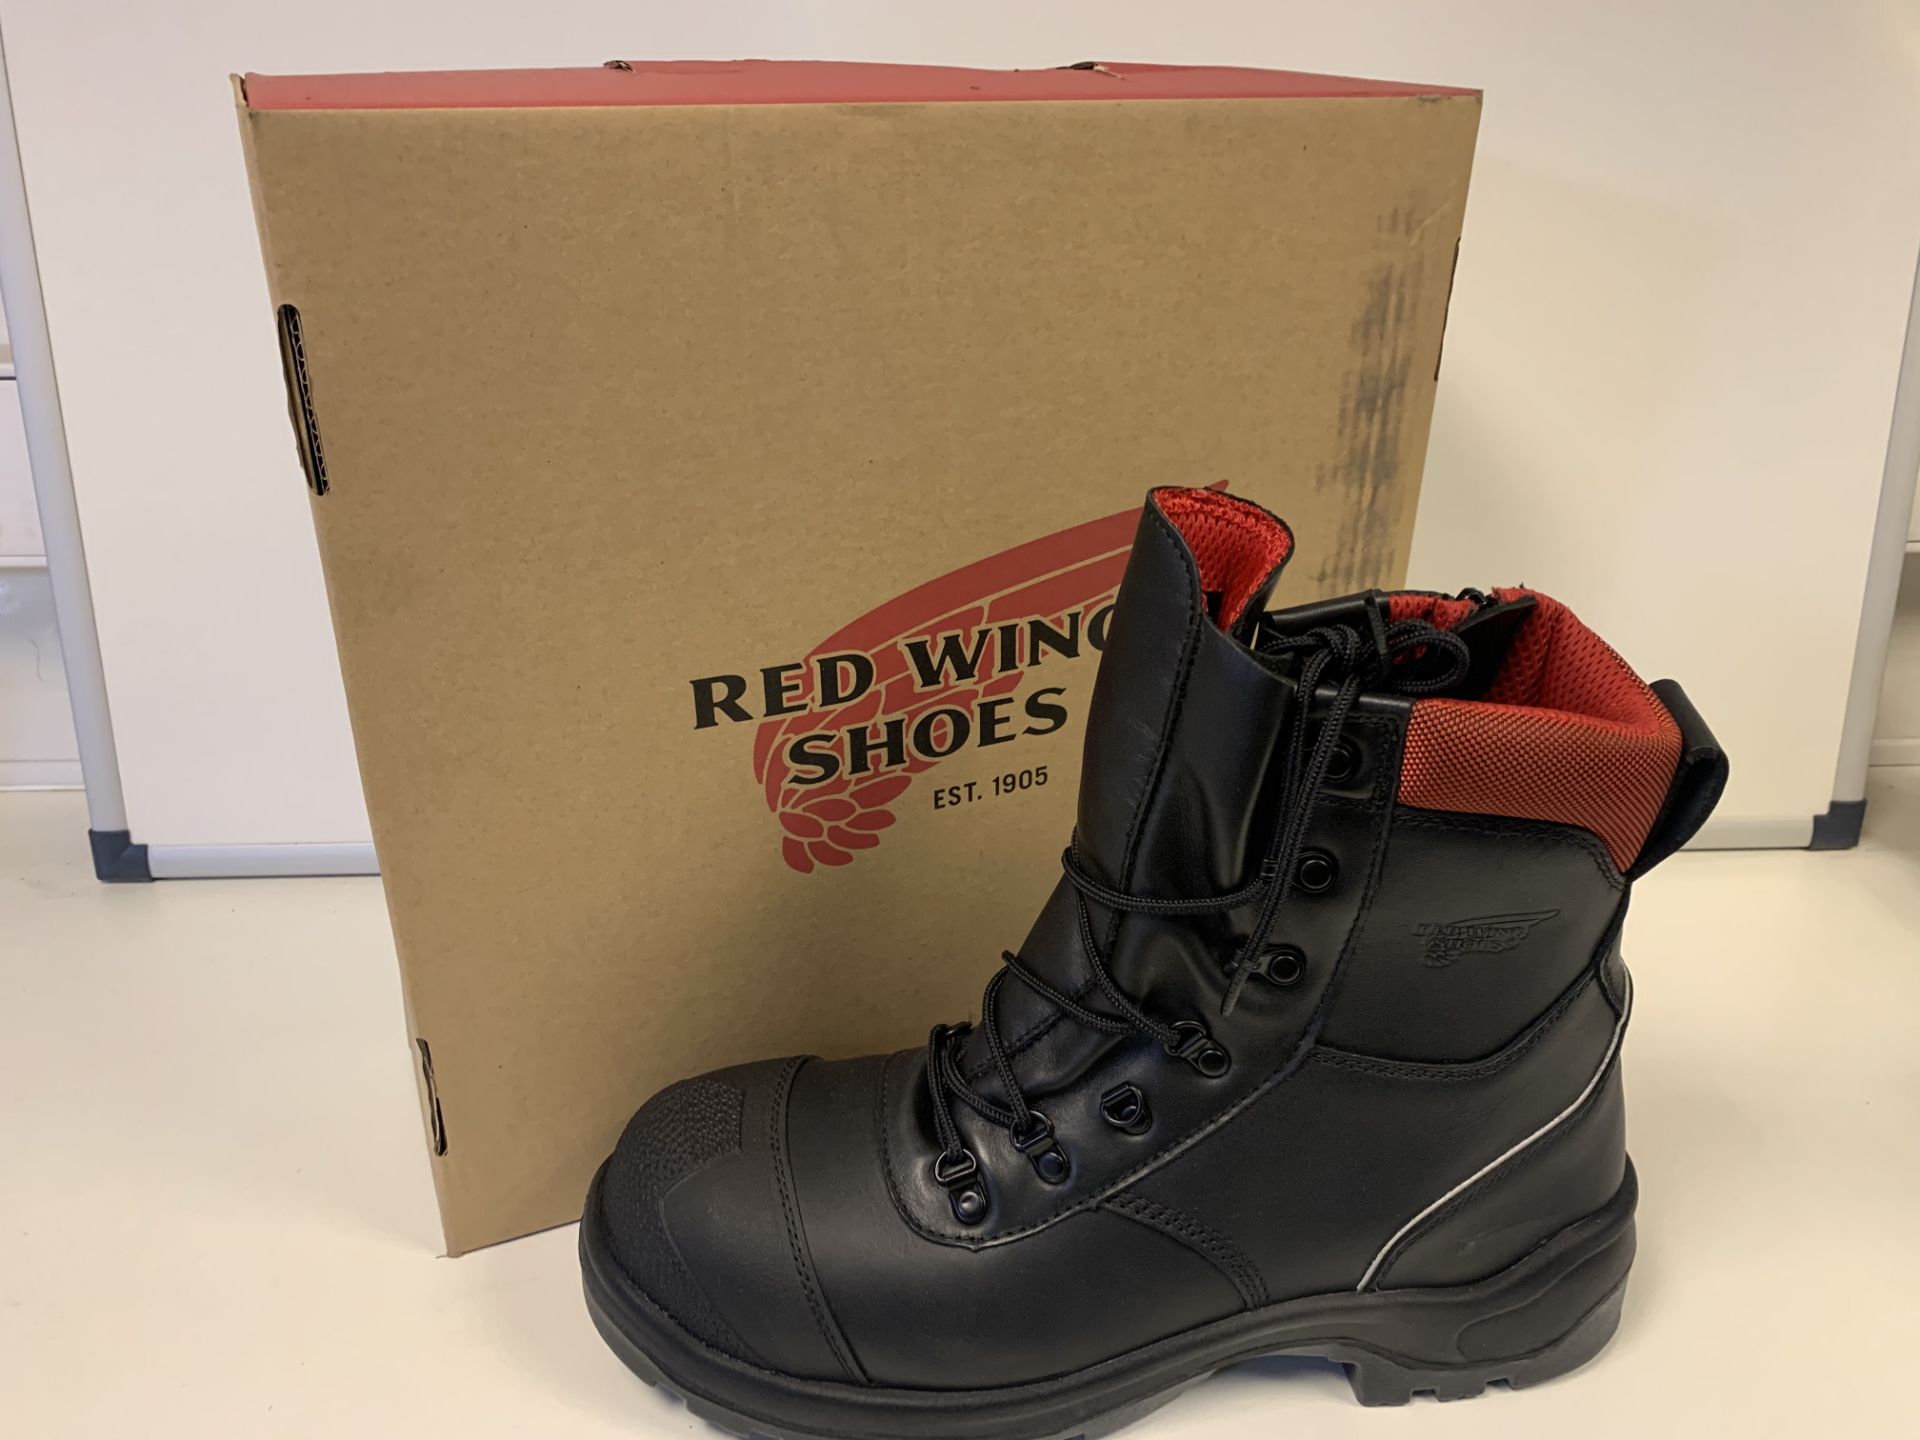 6 X BRAND NEW BOXED RED WING NON METALLIC TOE PUNCTURE RESISTANT SIZE 3.5 WORK BOOTS